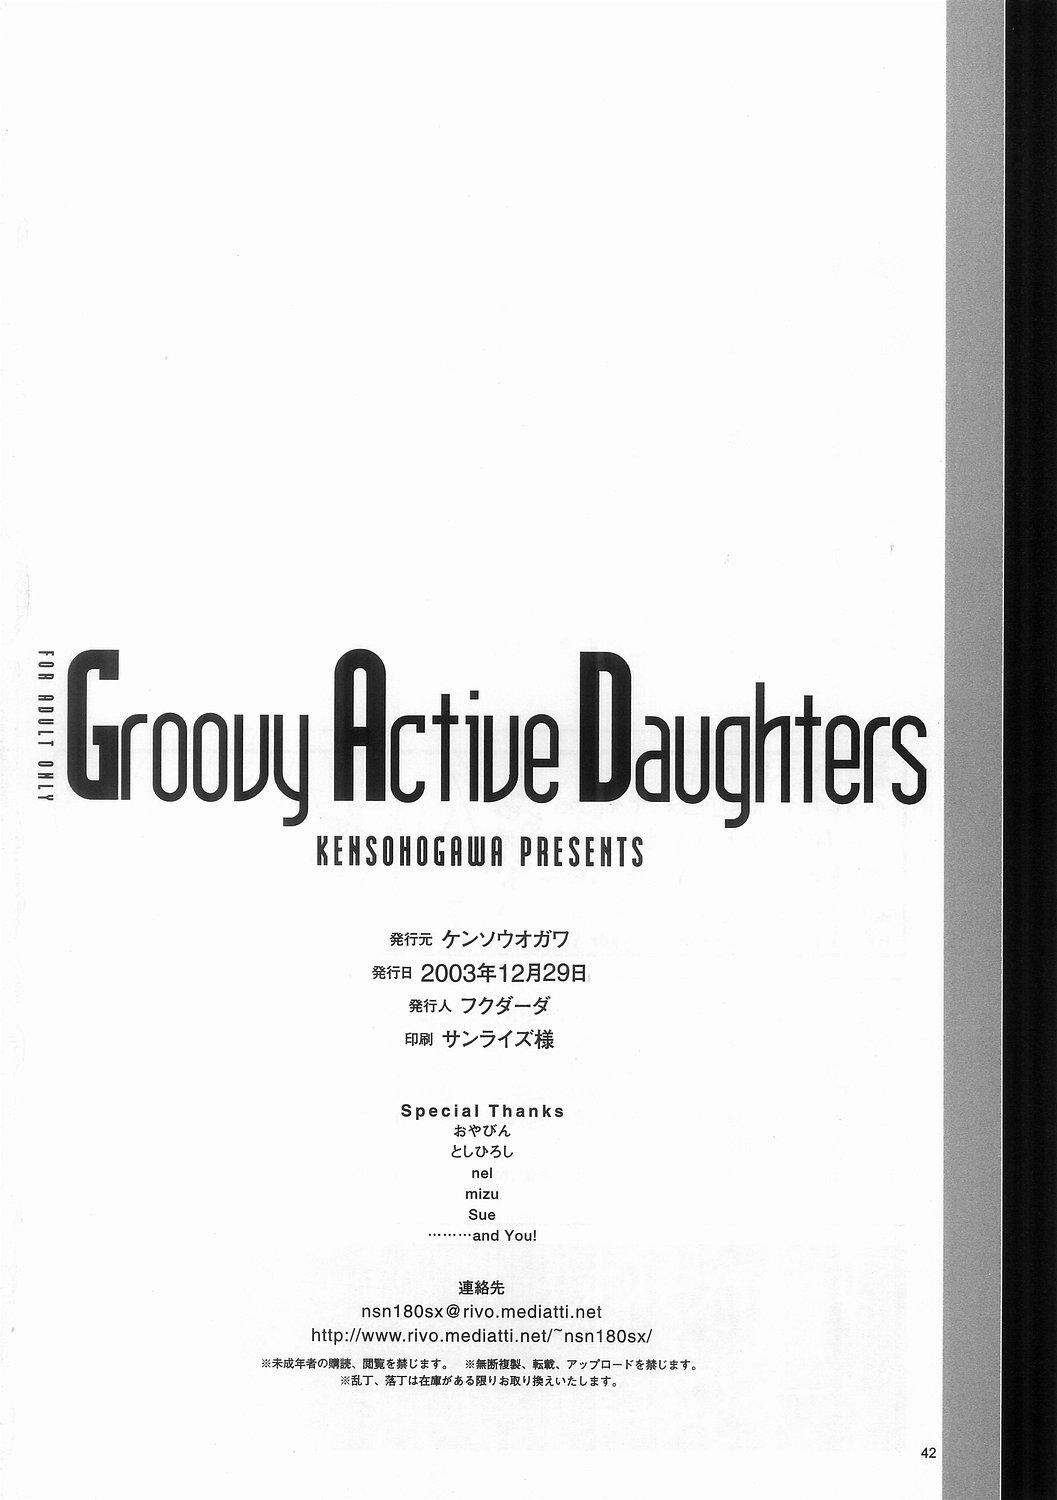 Groovy Active Daughters 41